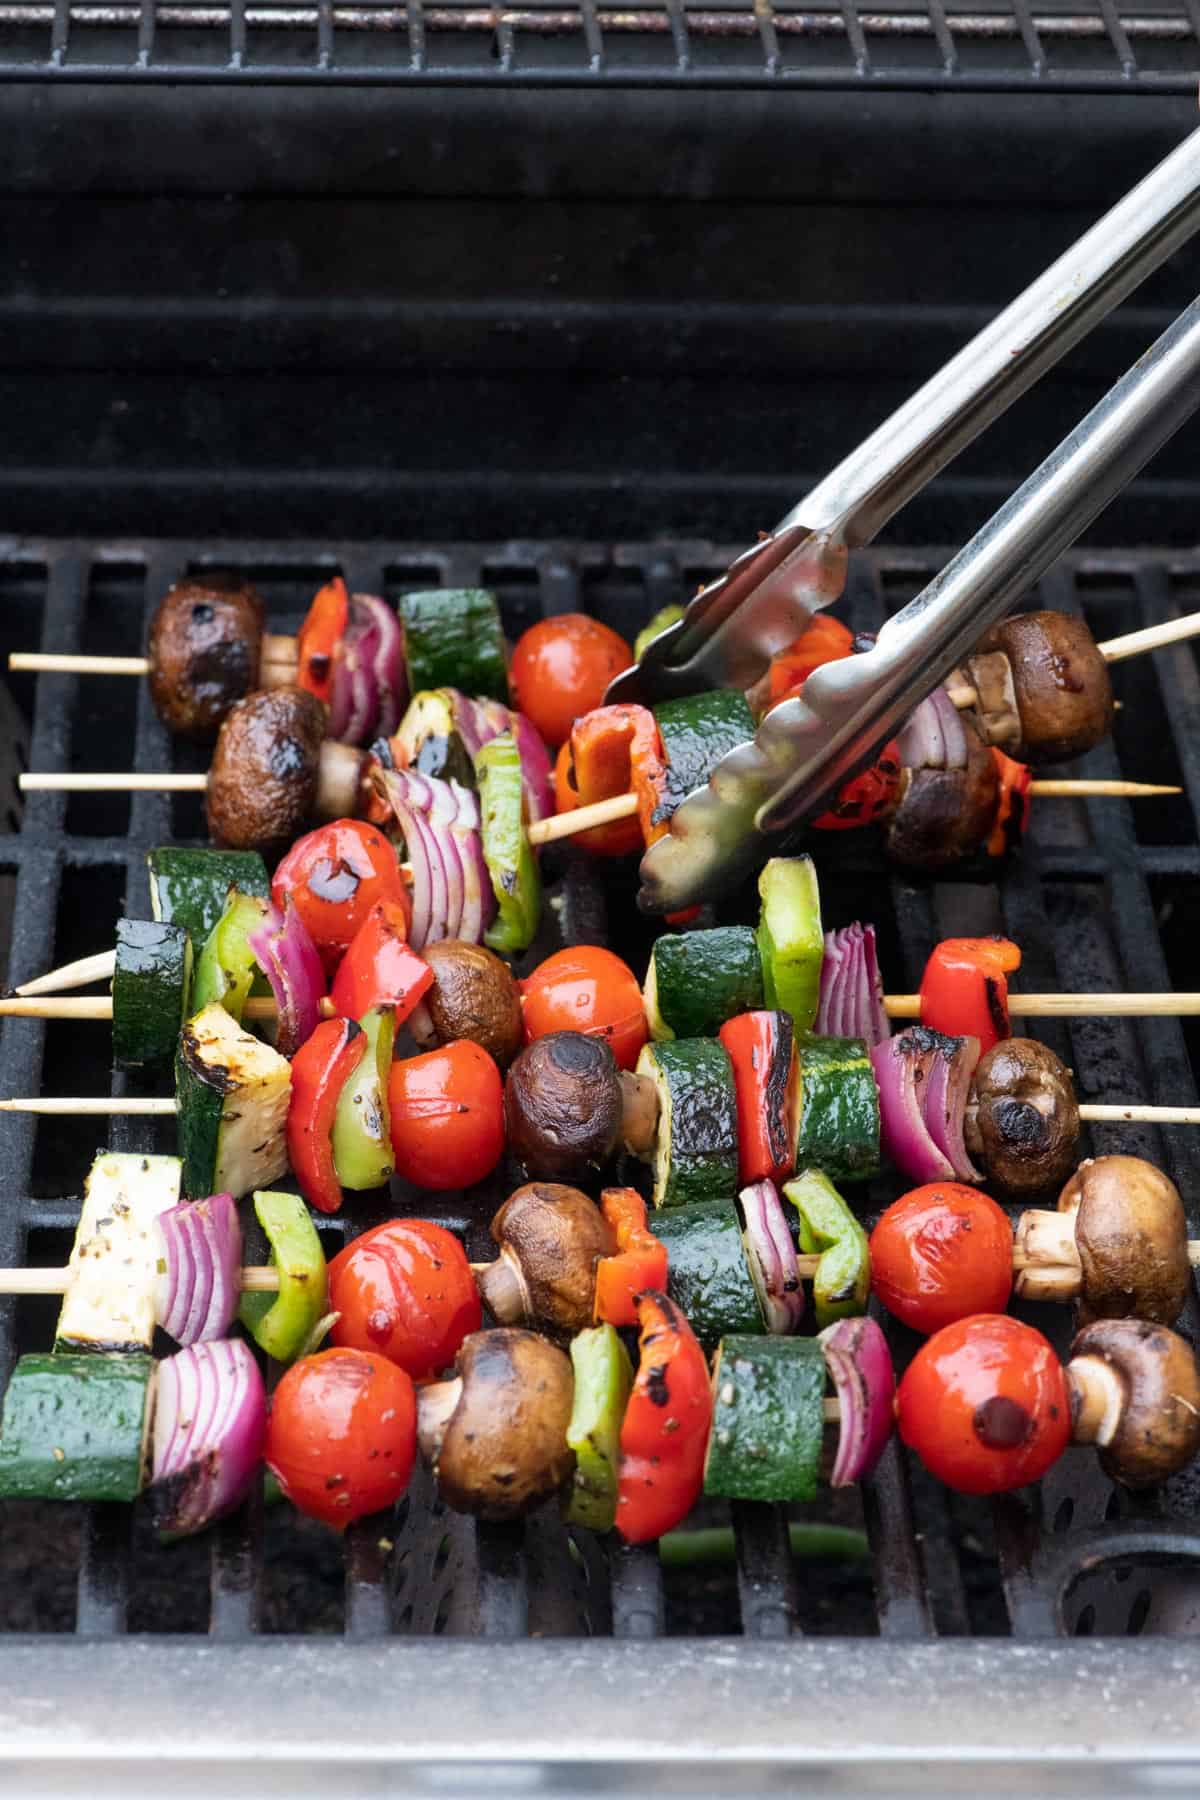 Tongs lifting up a veggie skewer to flip over on the grill with more.